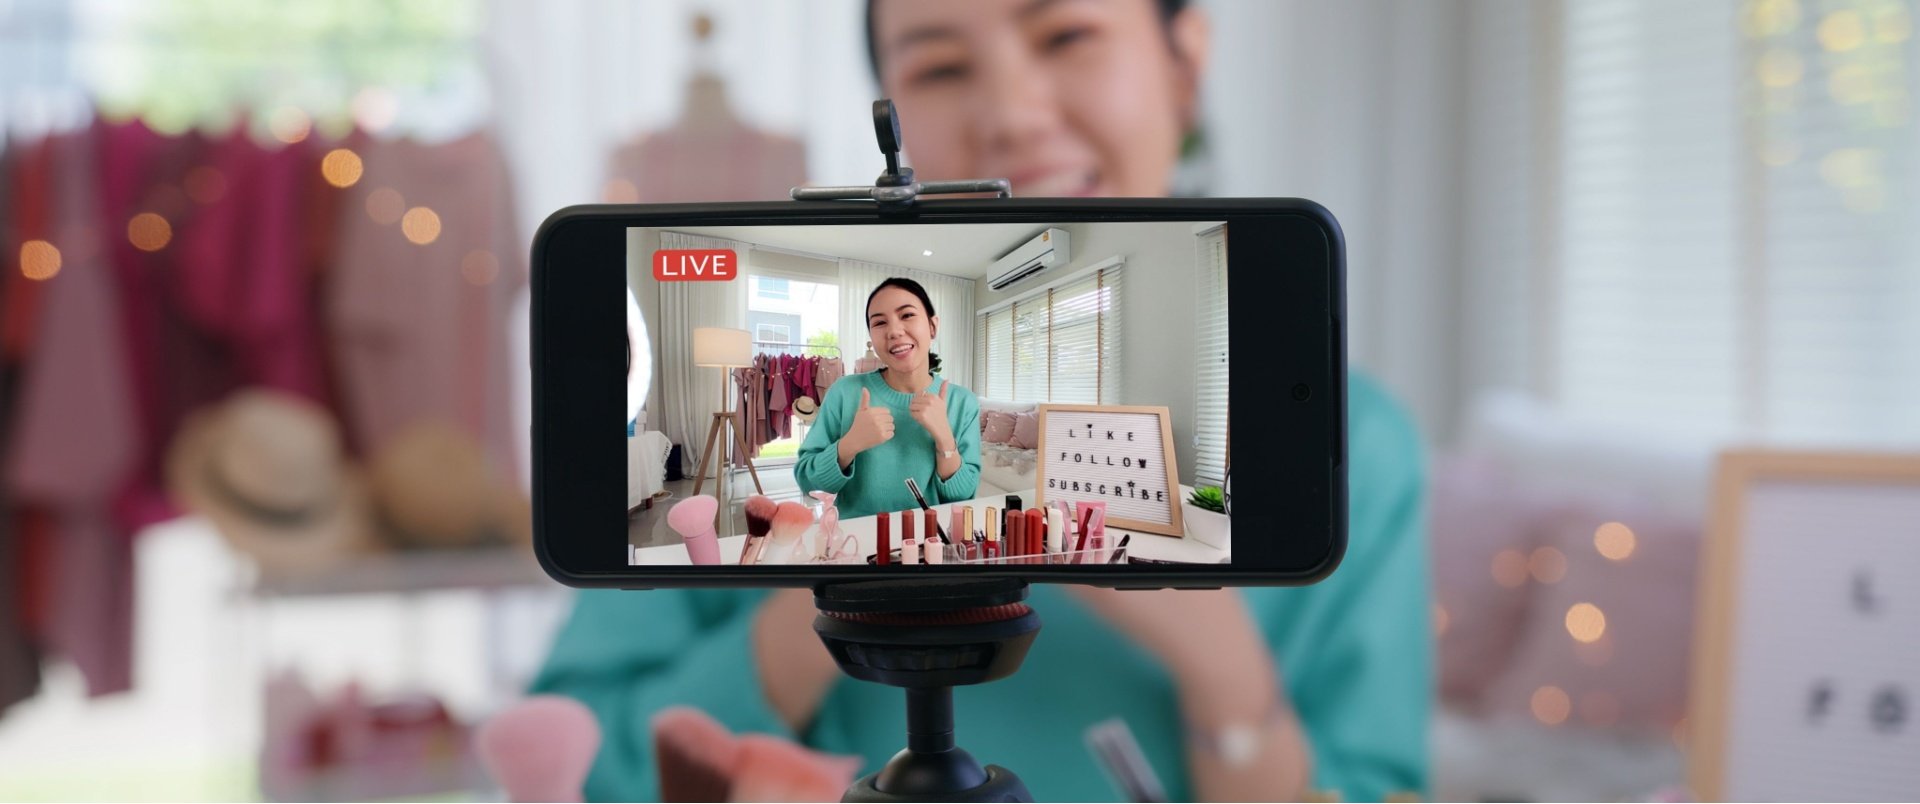 Phone live streaming a woman in a greeny blue top